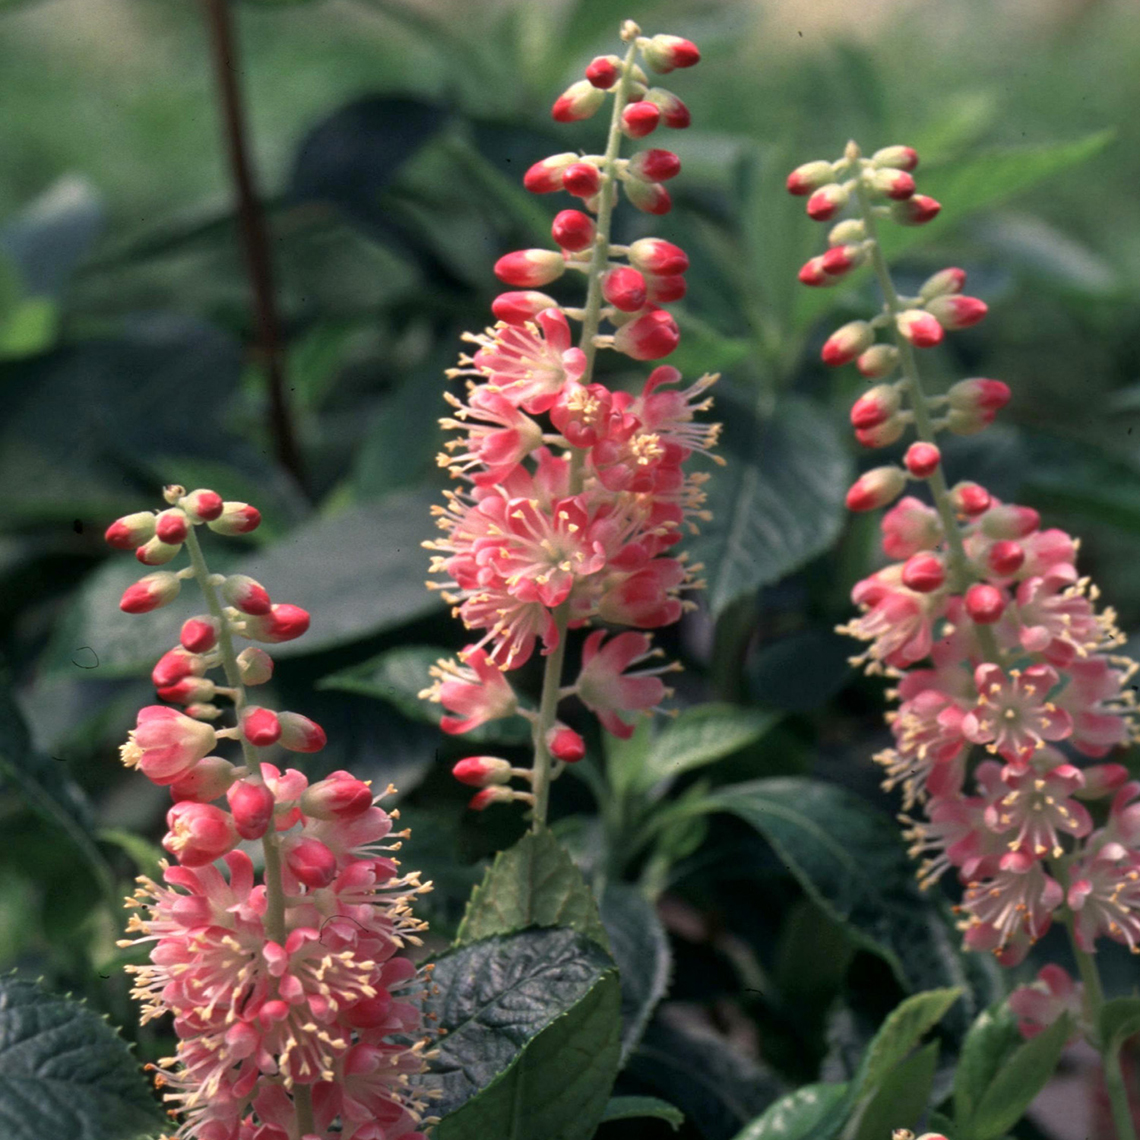 Close up of pink Clethra Ruby Spice flowers